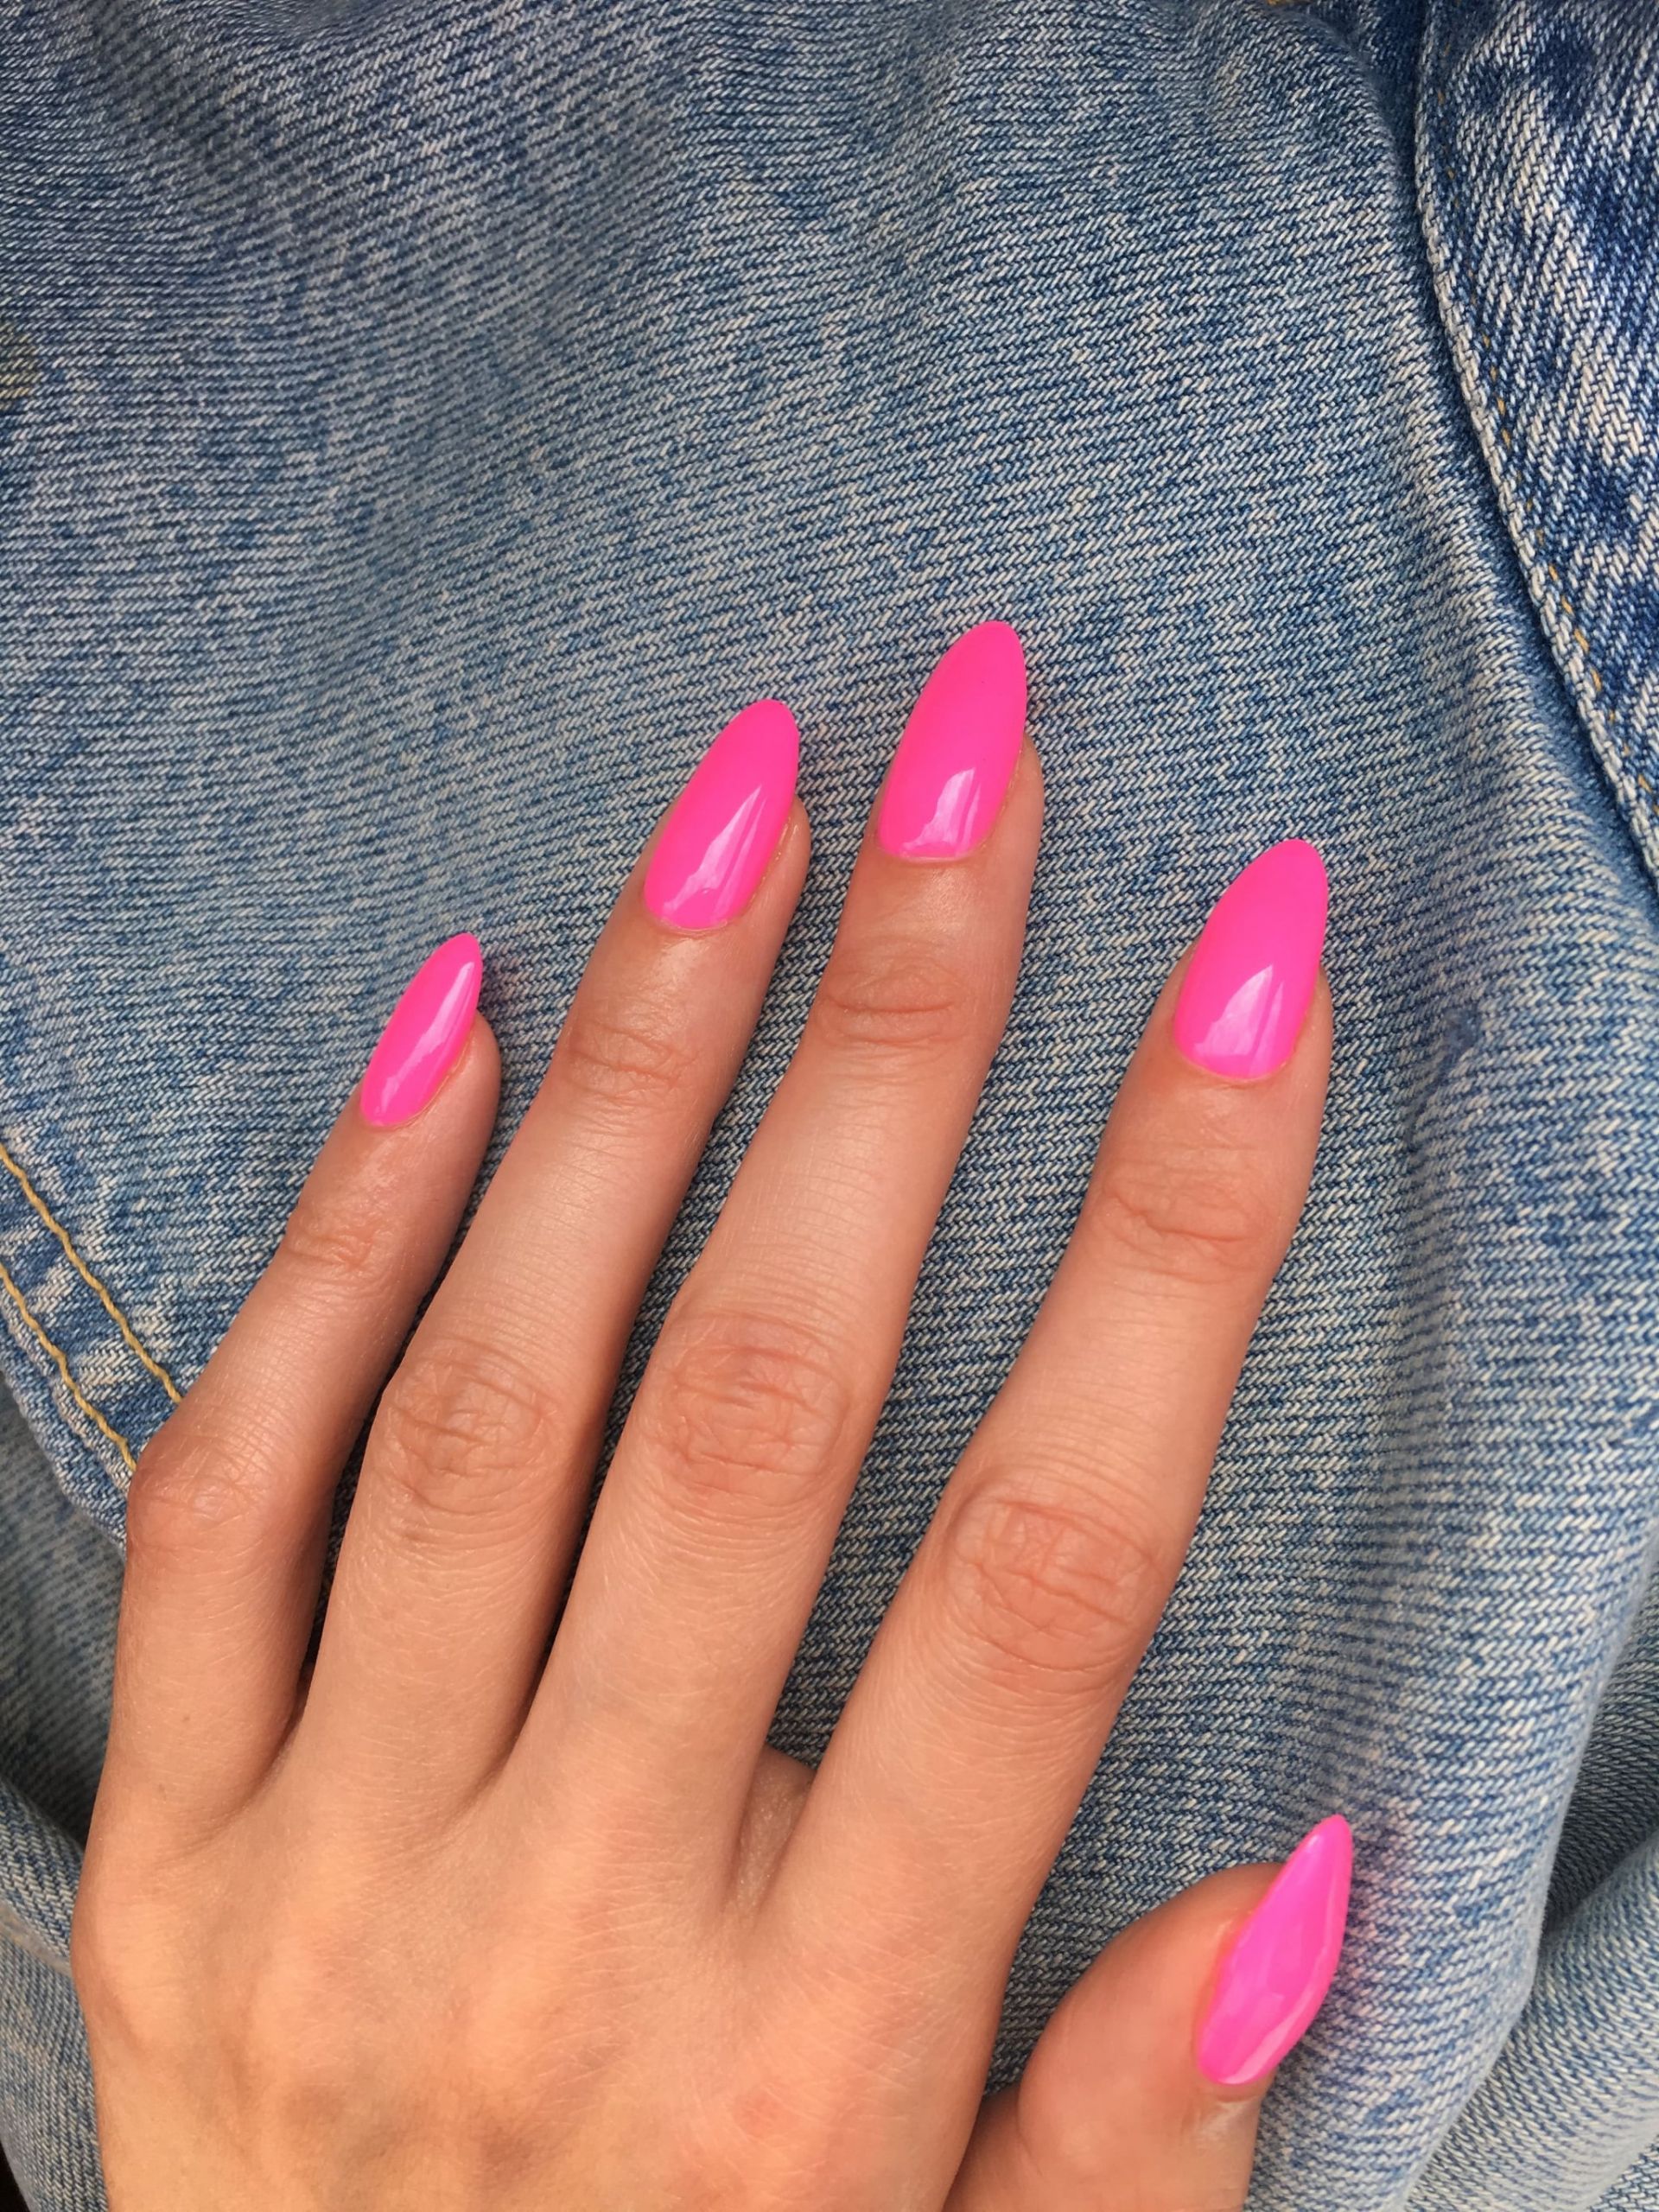 Pictures Of Beautiful Nails
 How to Grow Long Nails Faster